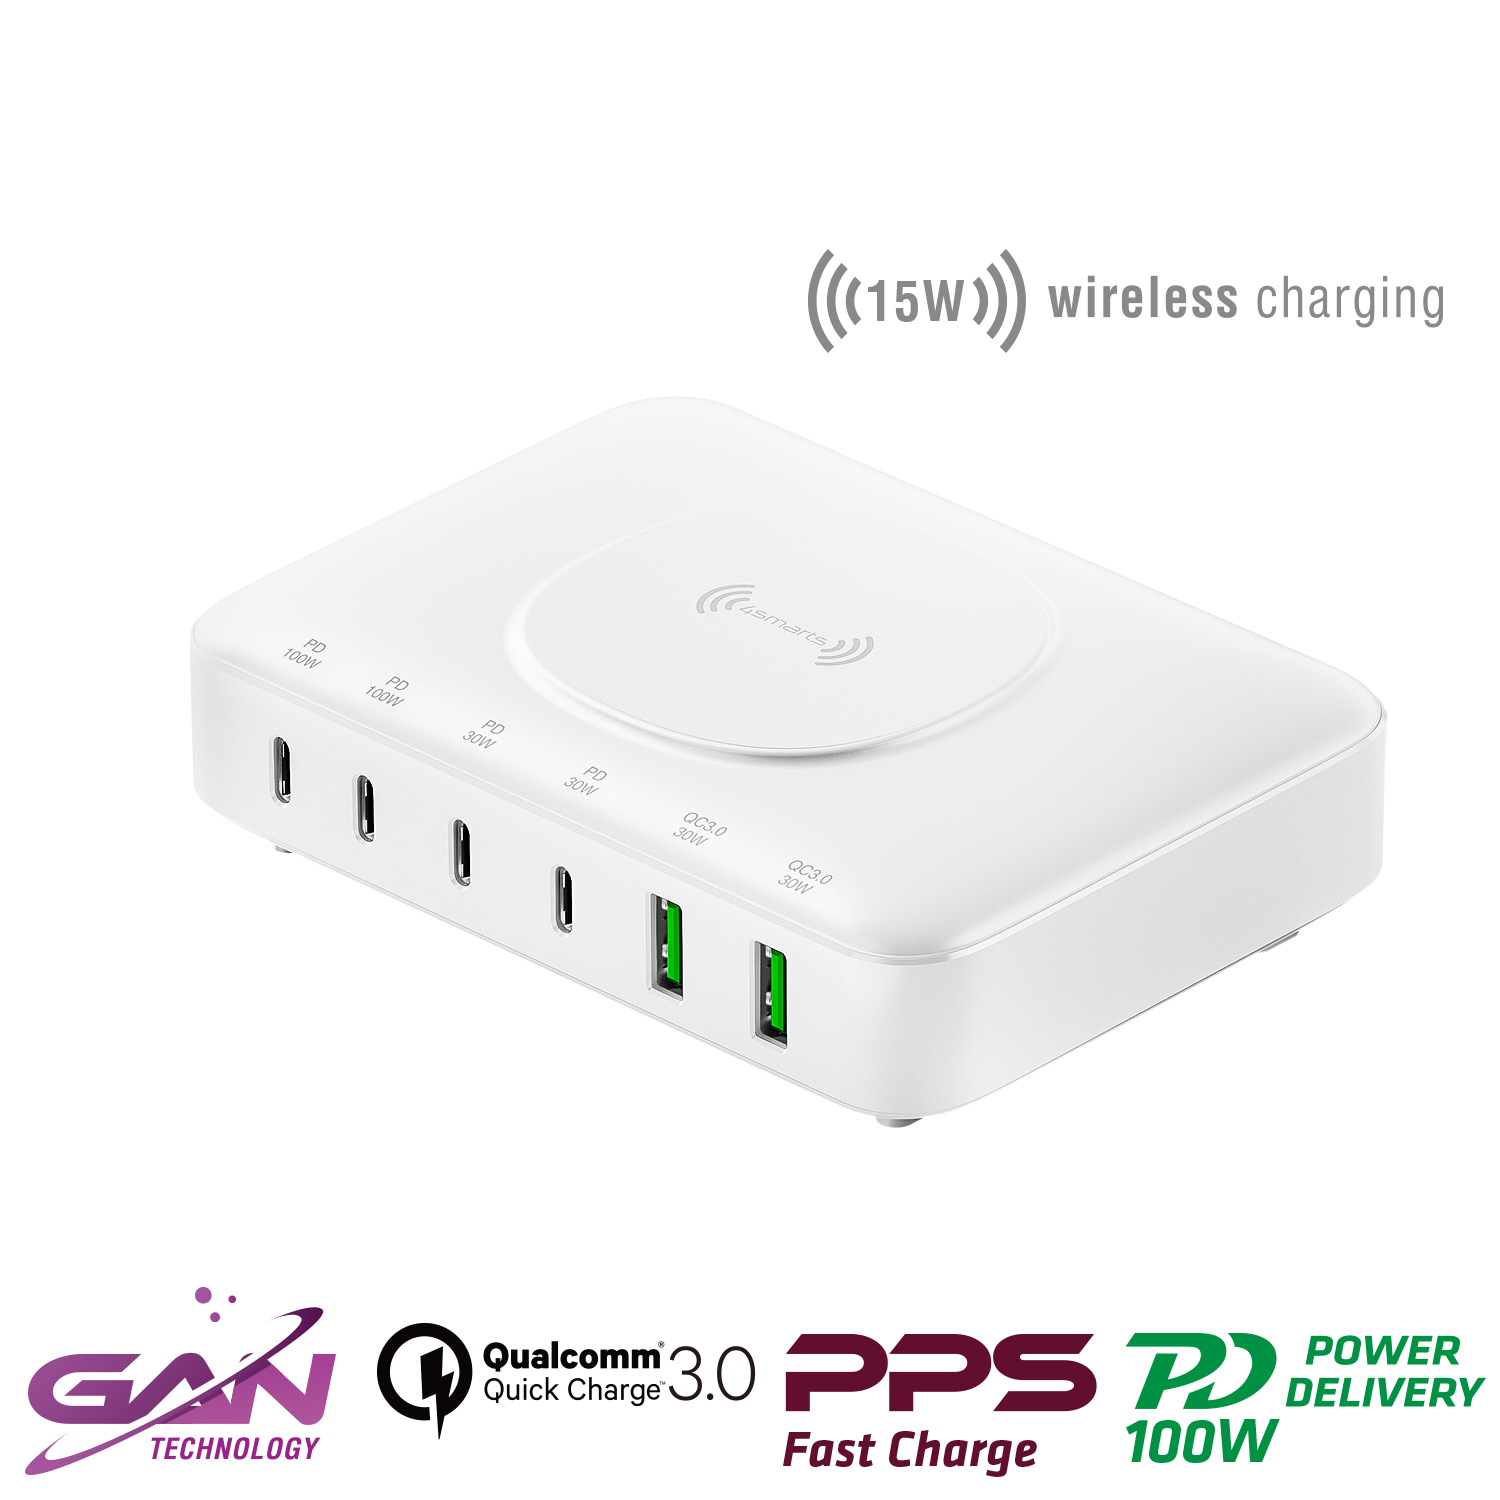 With the 4smarts 7in1 GaN charging station qi charging starts automatically.